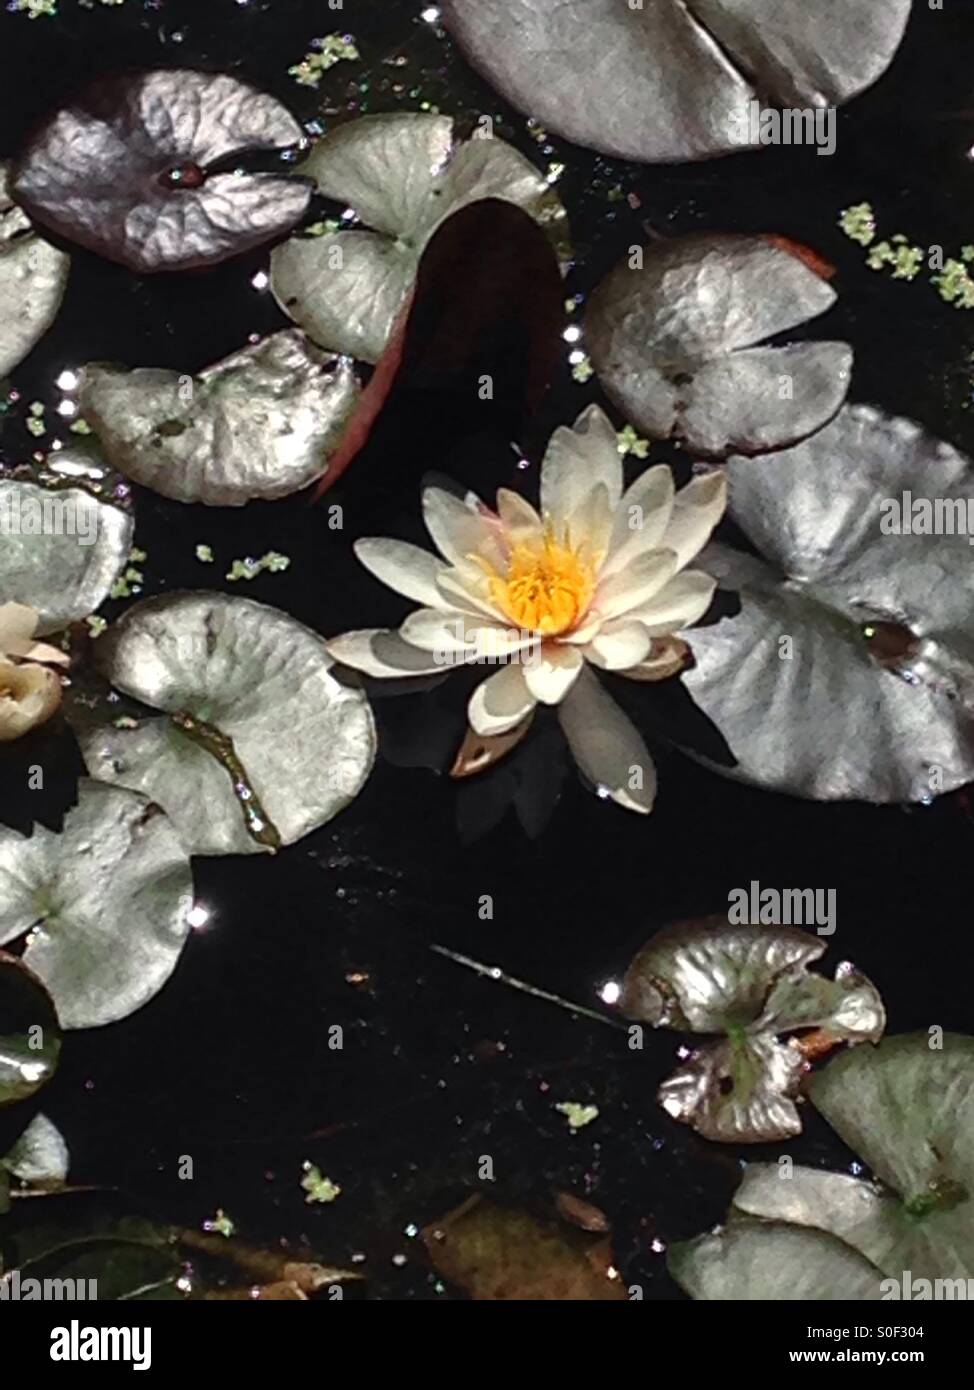 Beautiful water lily in full bloom. No edits or filters used. Stock Photo